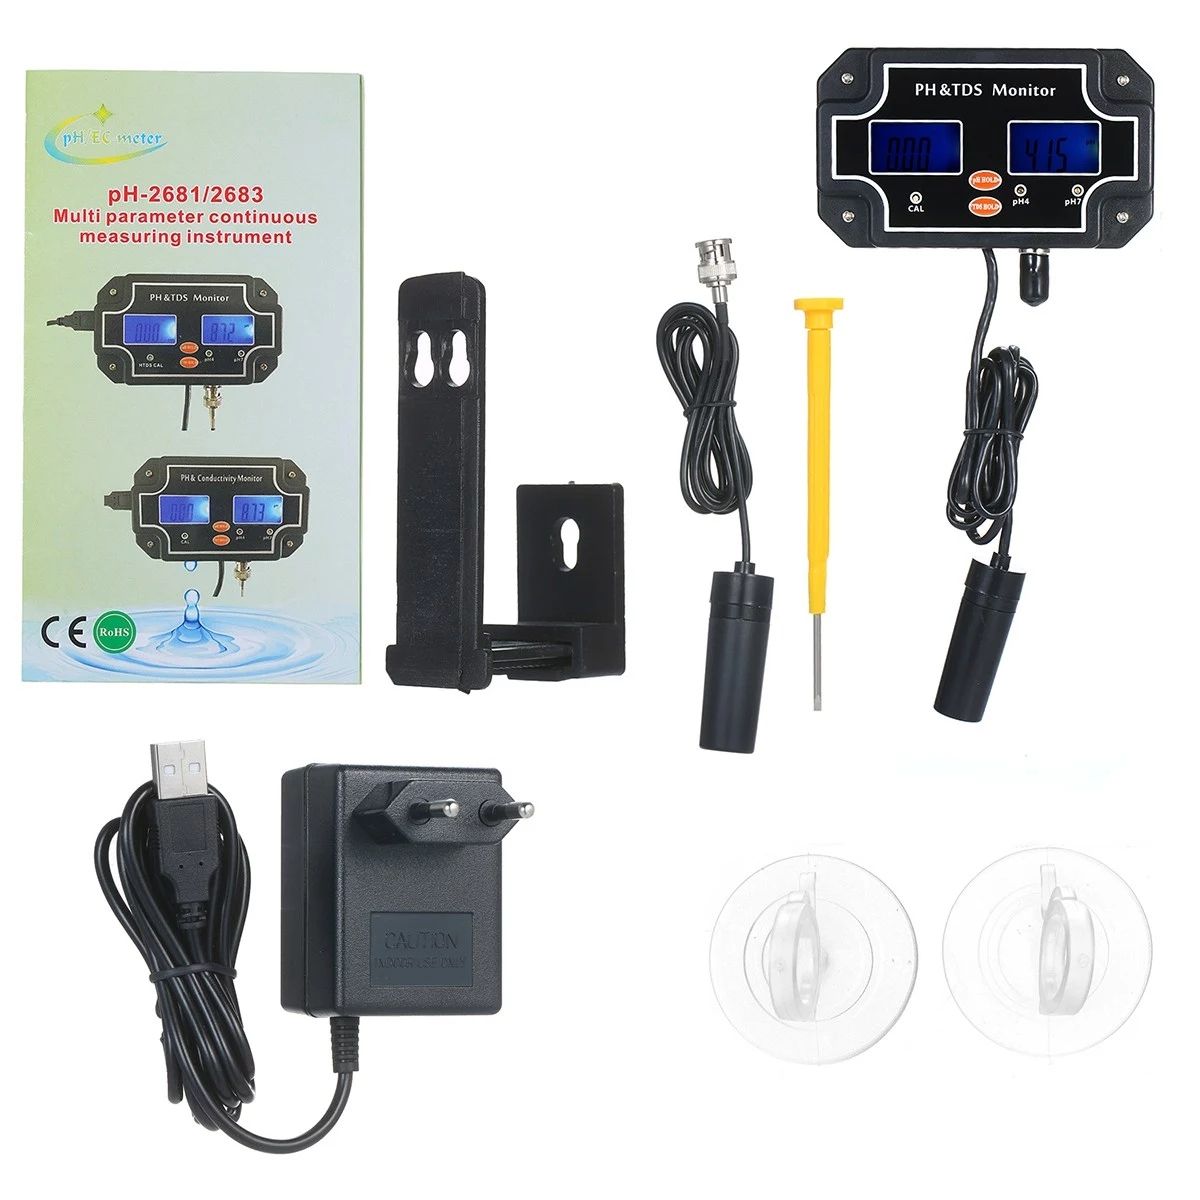 PHTDS-2683-2-in-1-Water-Quality-Tester-pHTDS-Meter-Waterproof-Double-Display-Tester-Black-EU-Plug-1748254